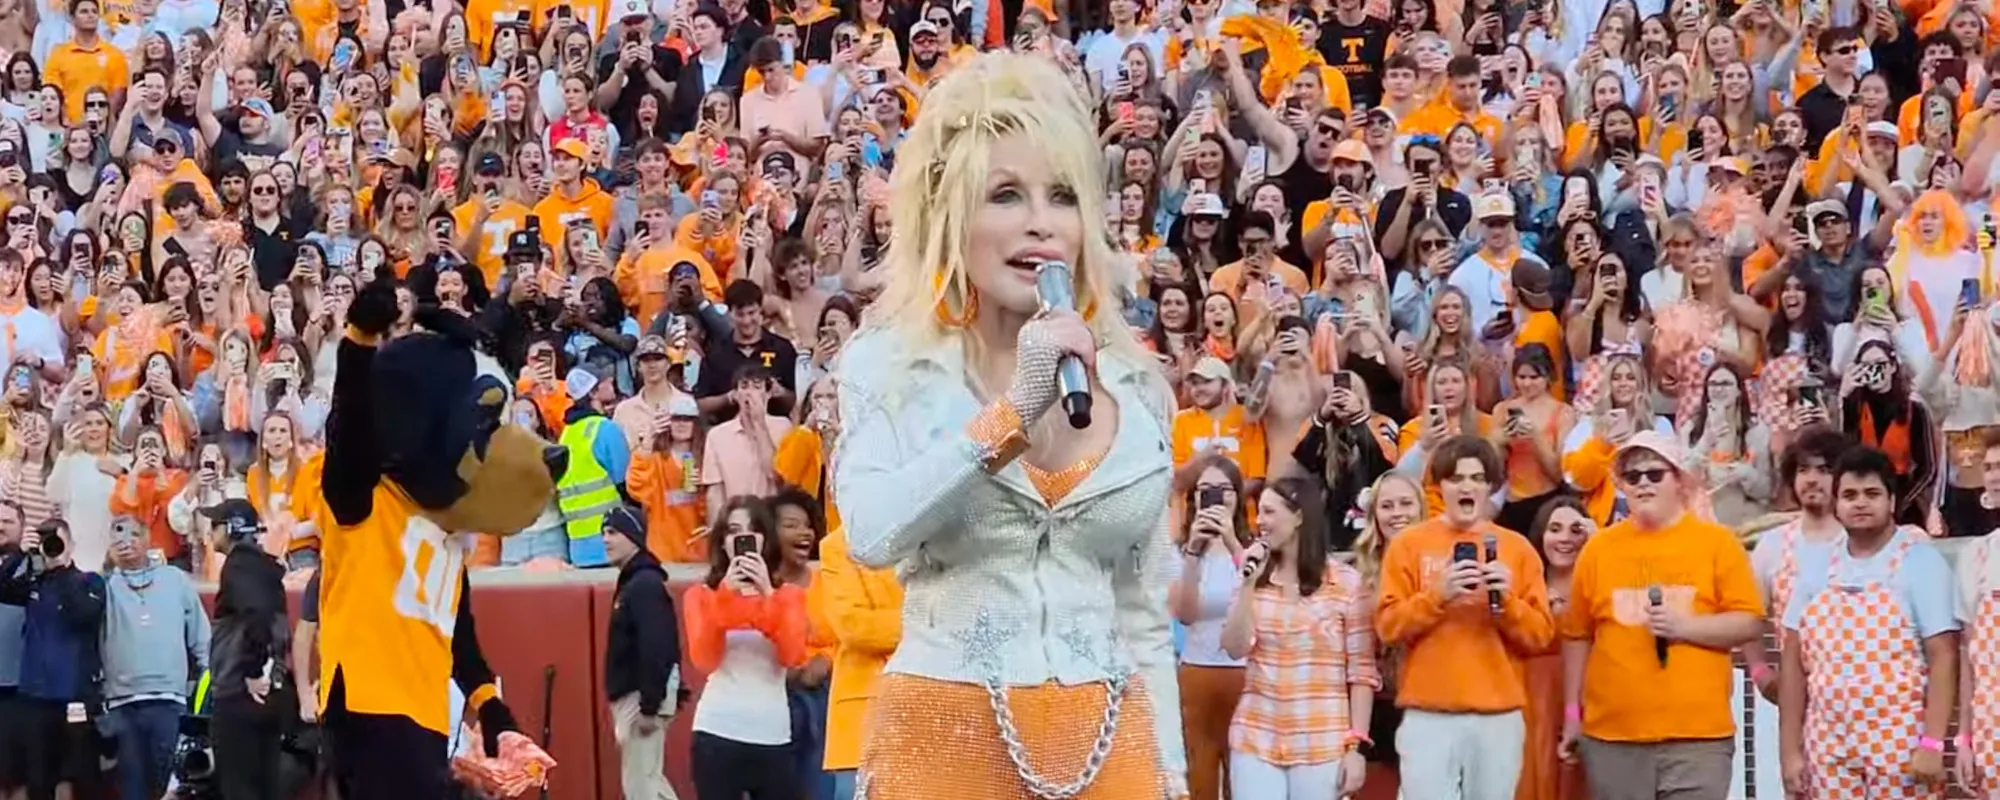 Watch: Dolly Parton Performs “Rocky Top” at Tennessee-Georgia Football Game